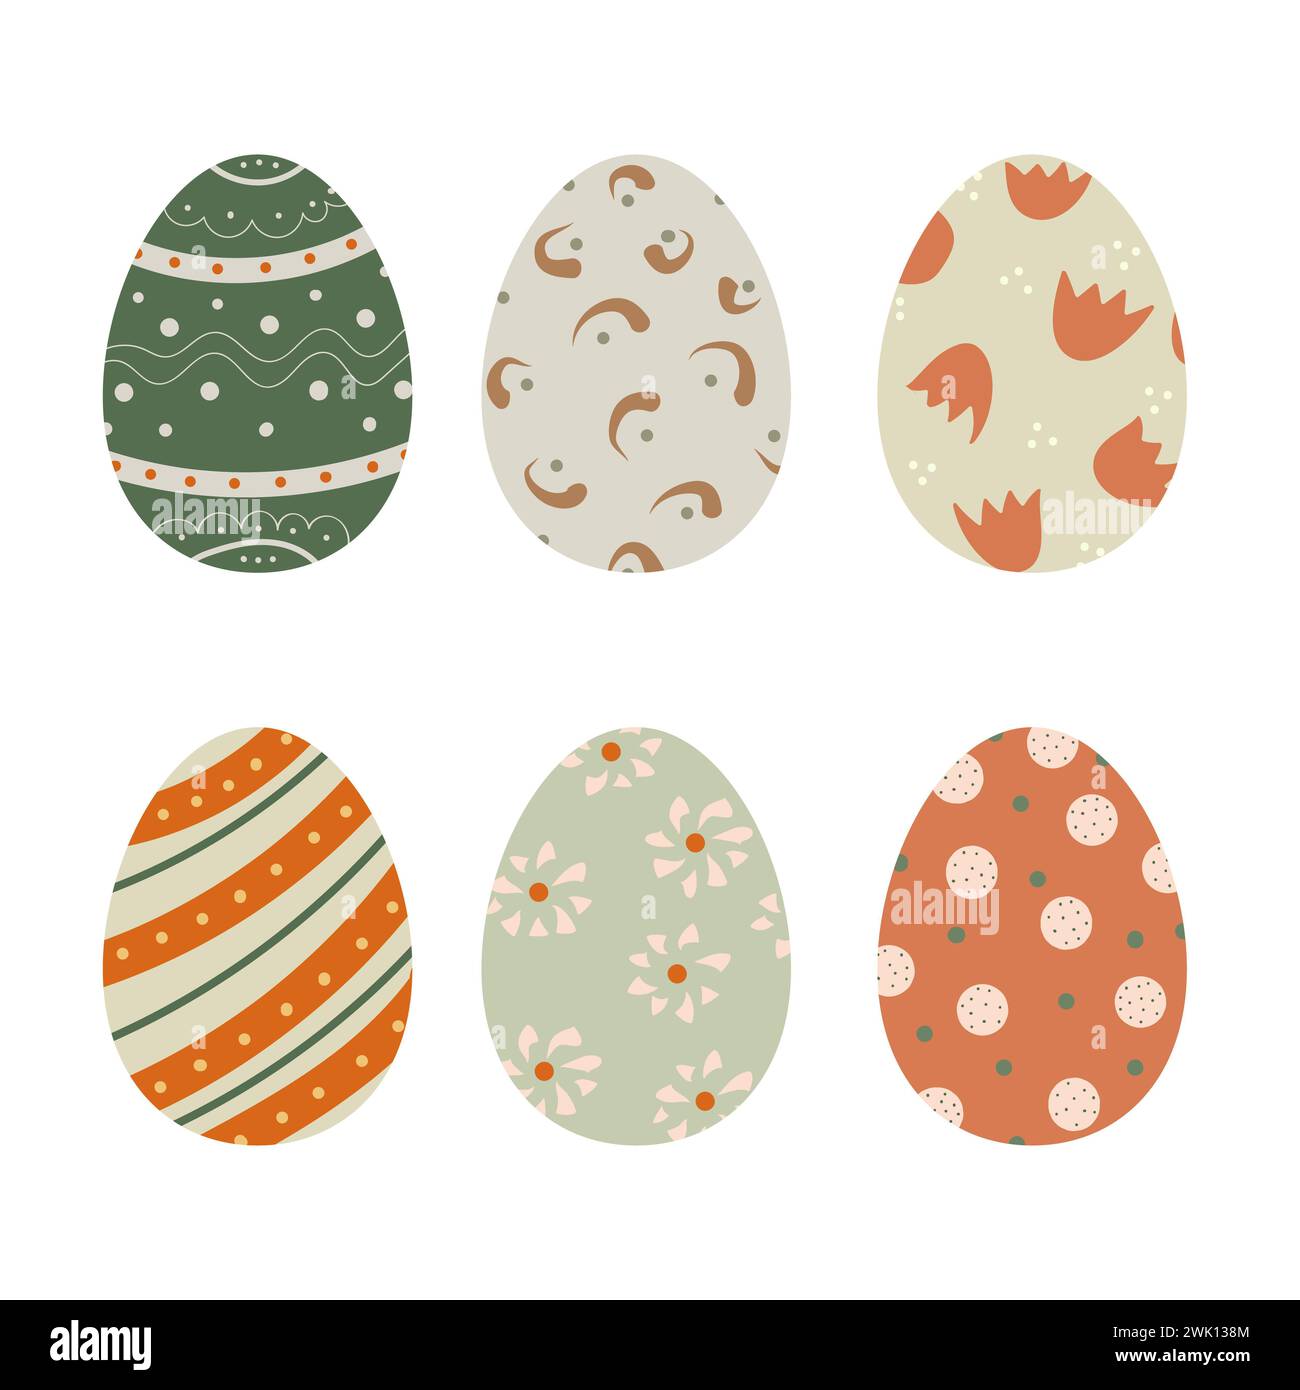 Set of cute decorated Easter eggs isolated on white background. Collection of symbols of religious holiday covered with different patterns - dots Stock Photo